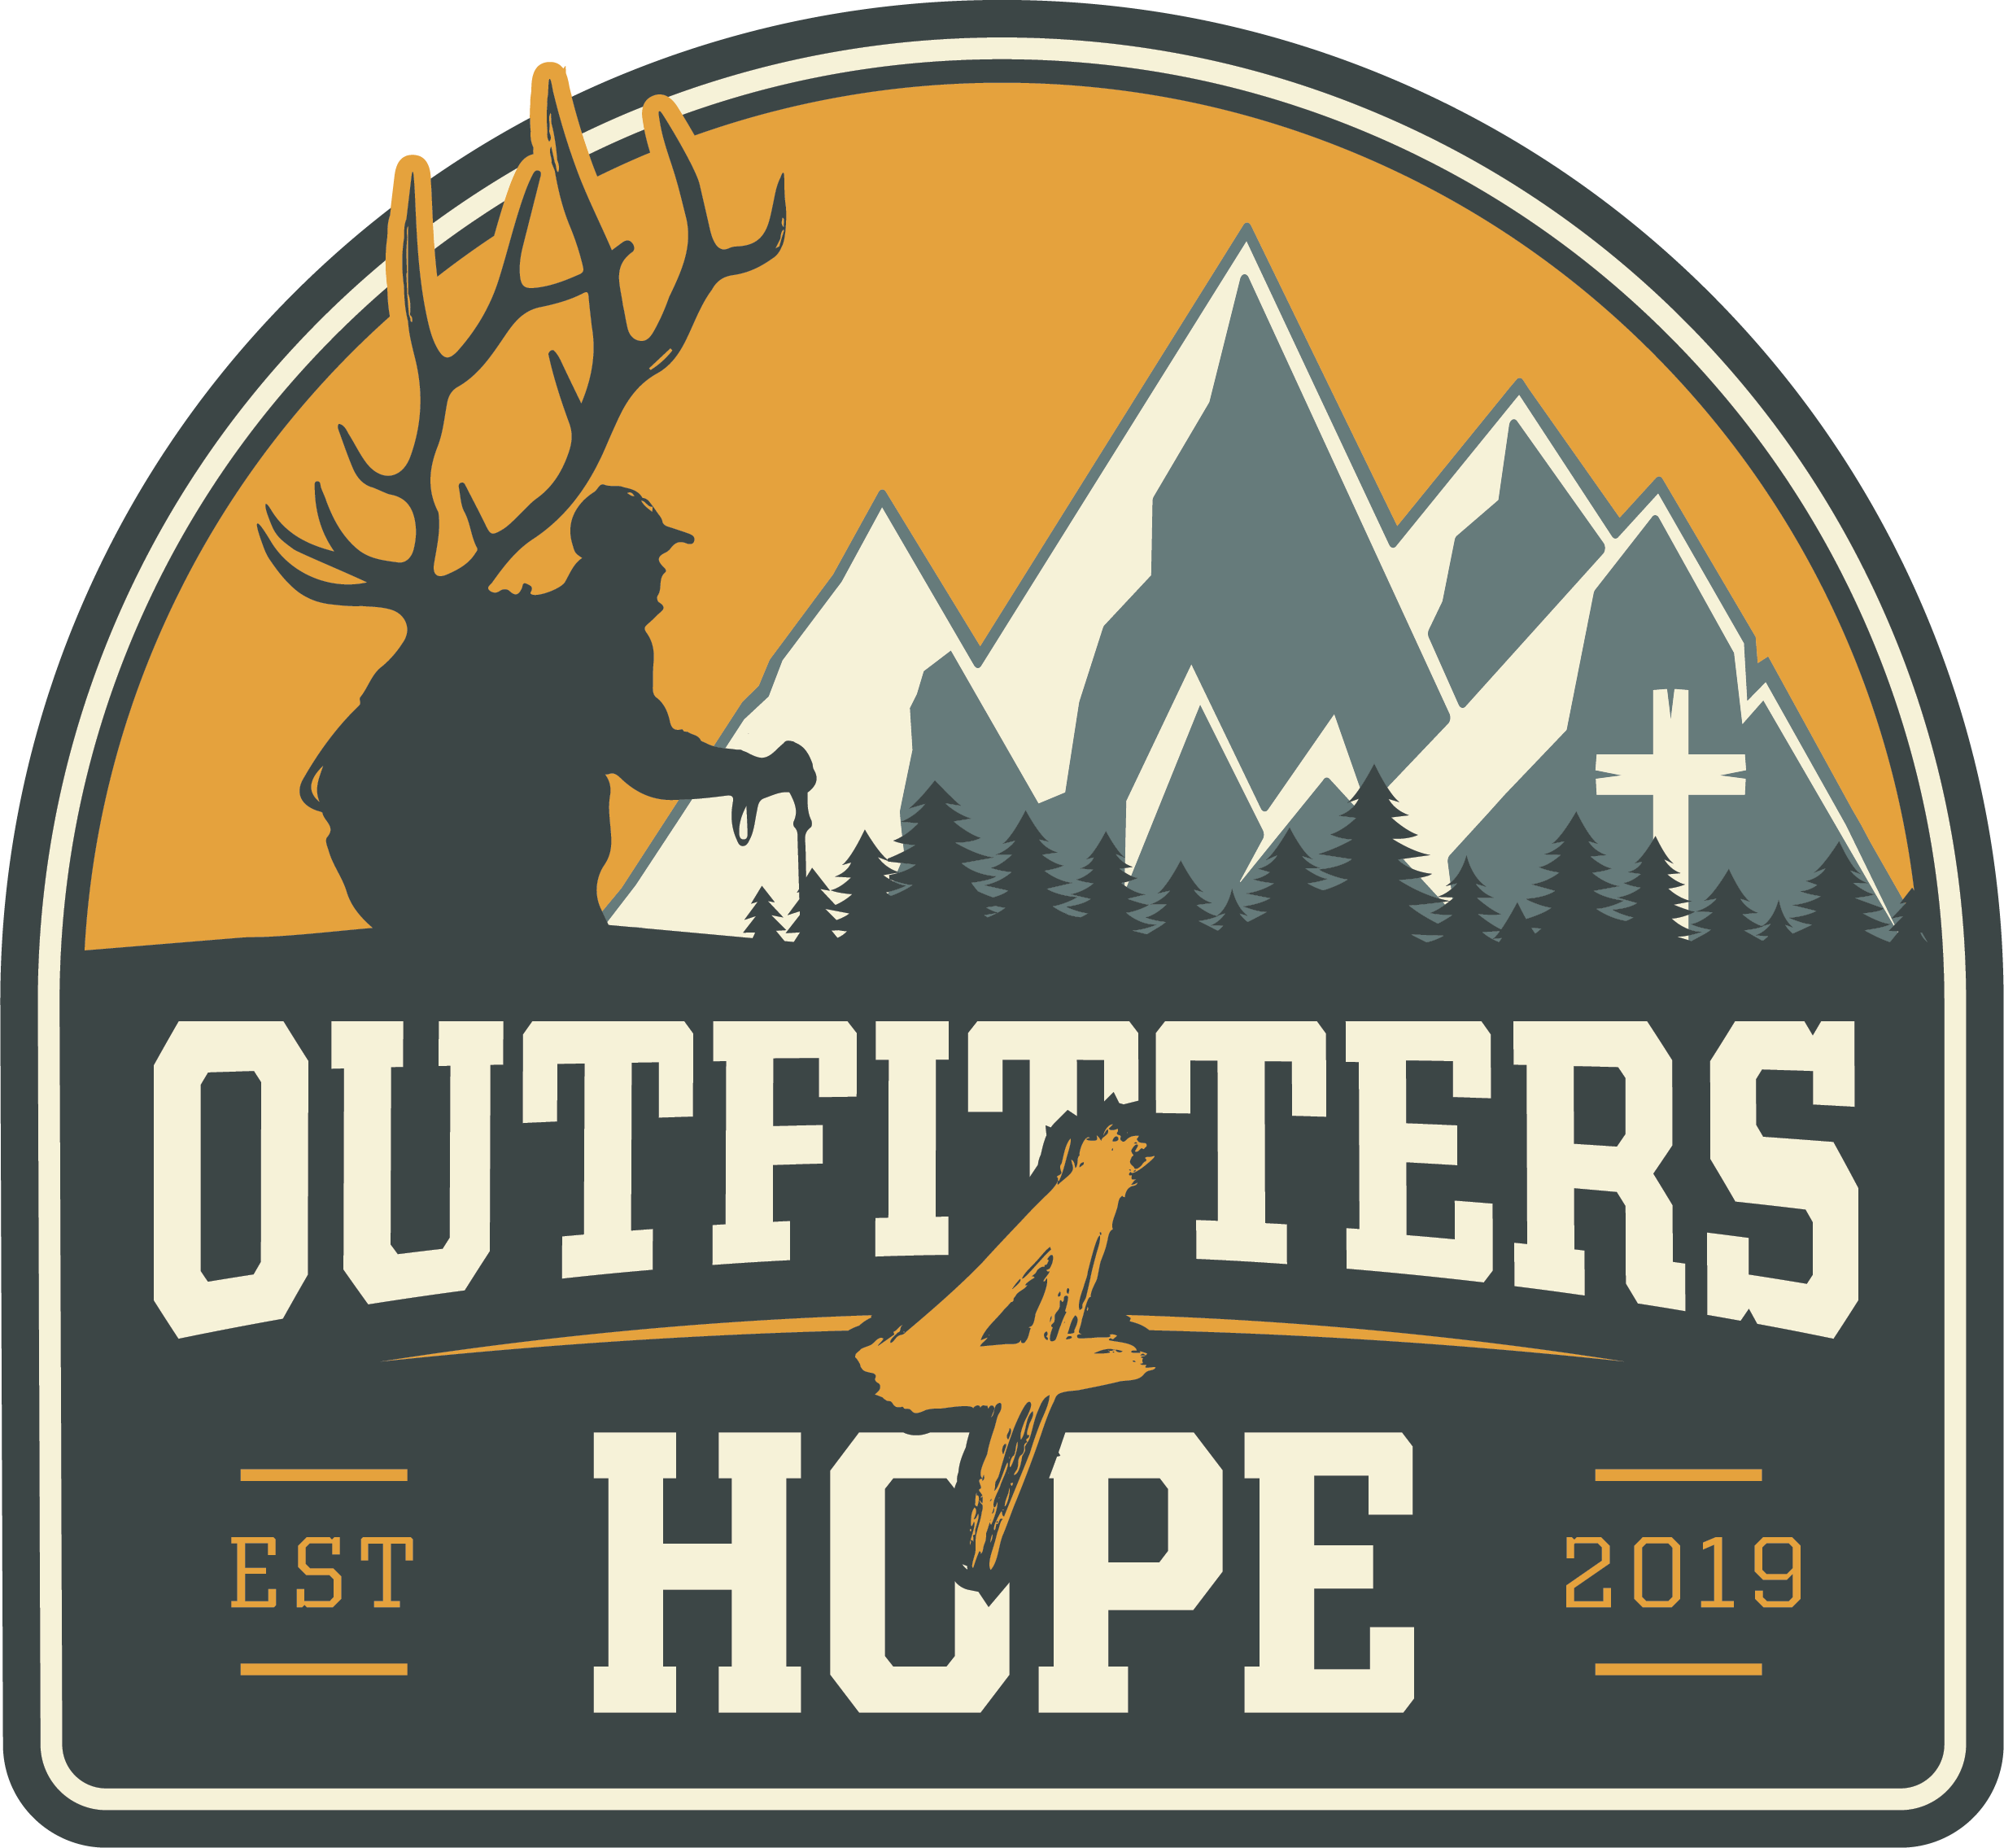 Outfitters For Hope